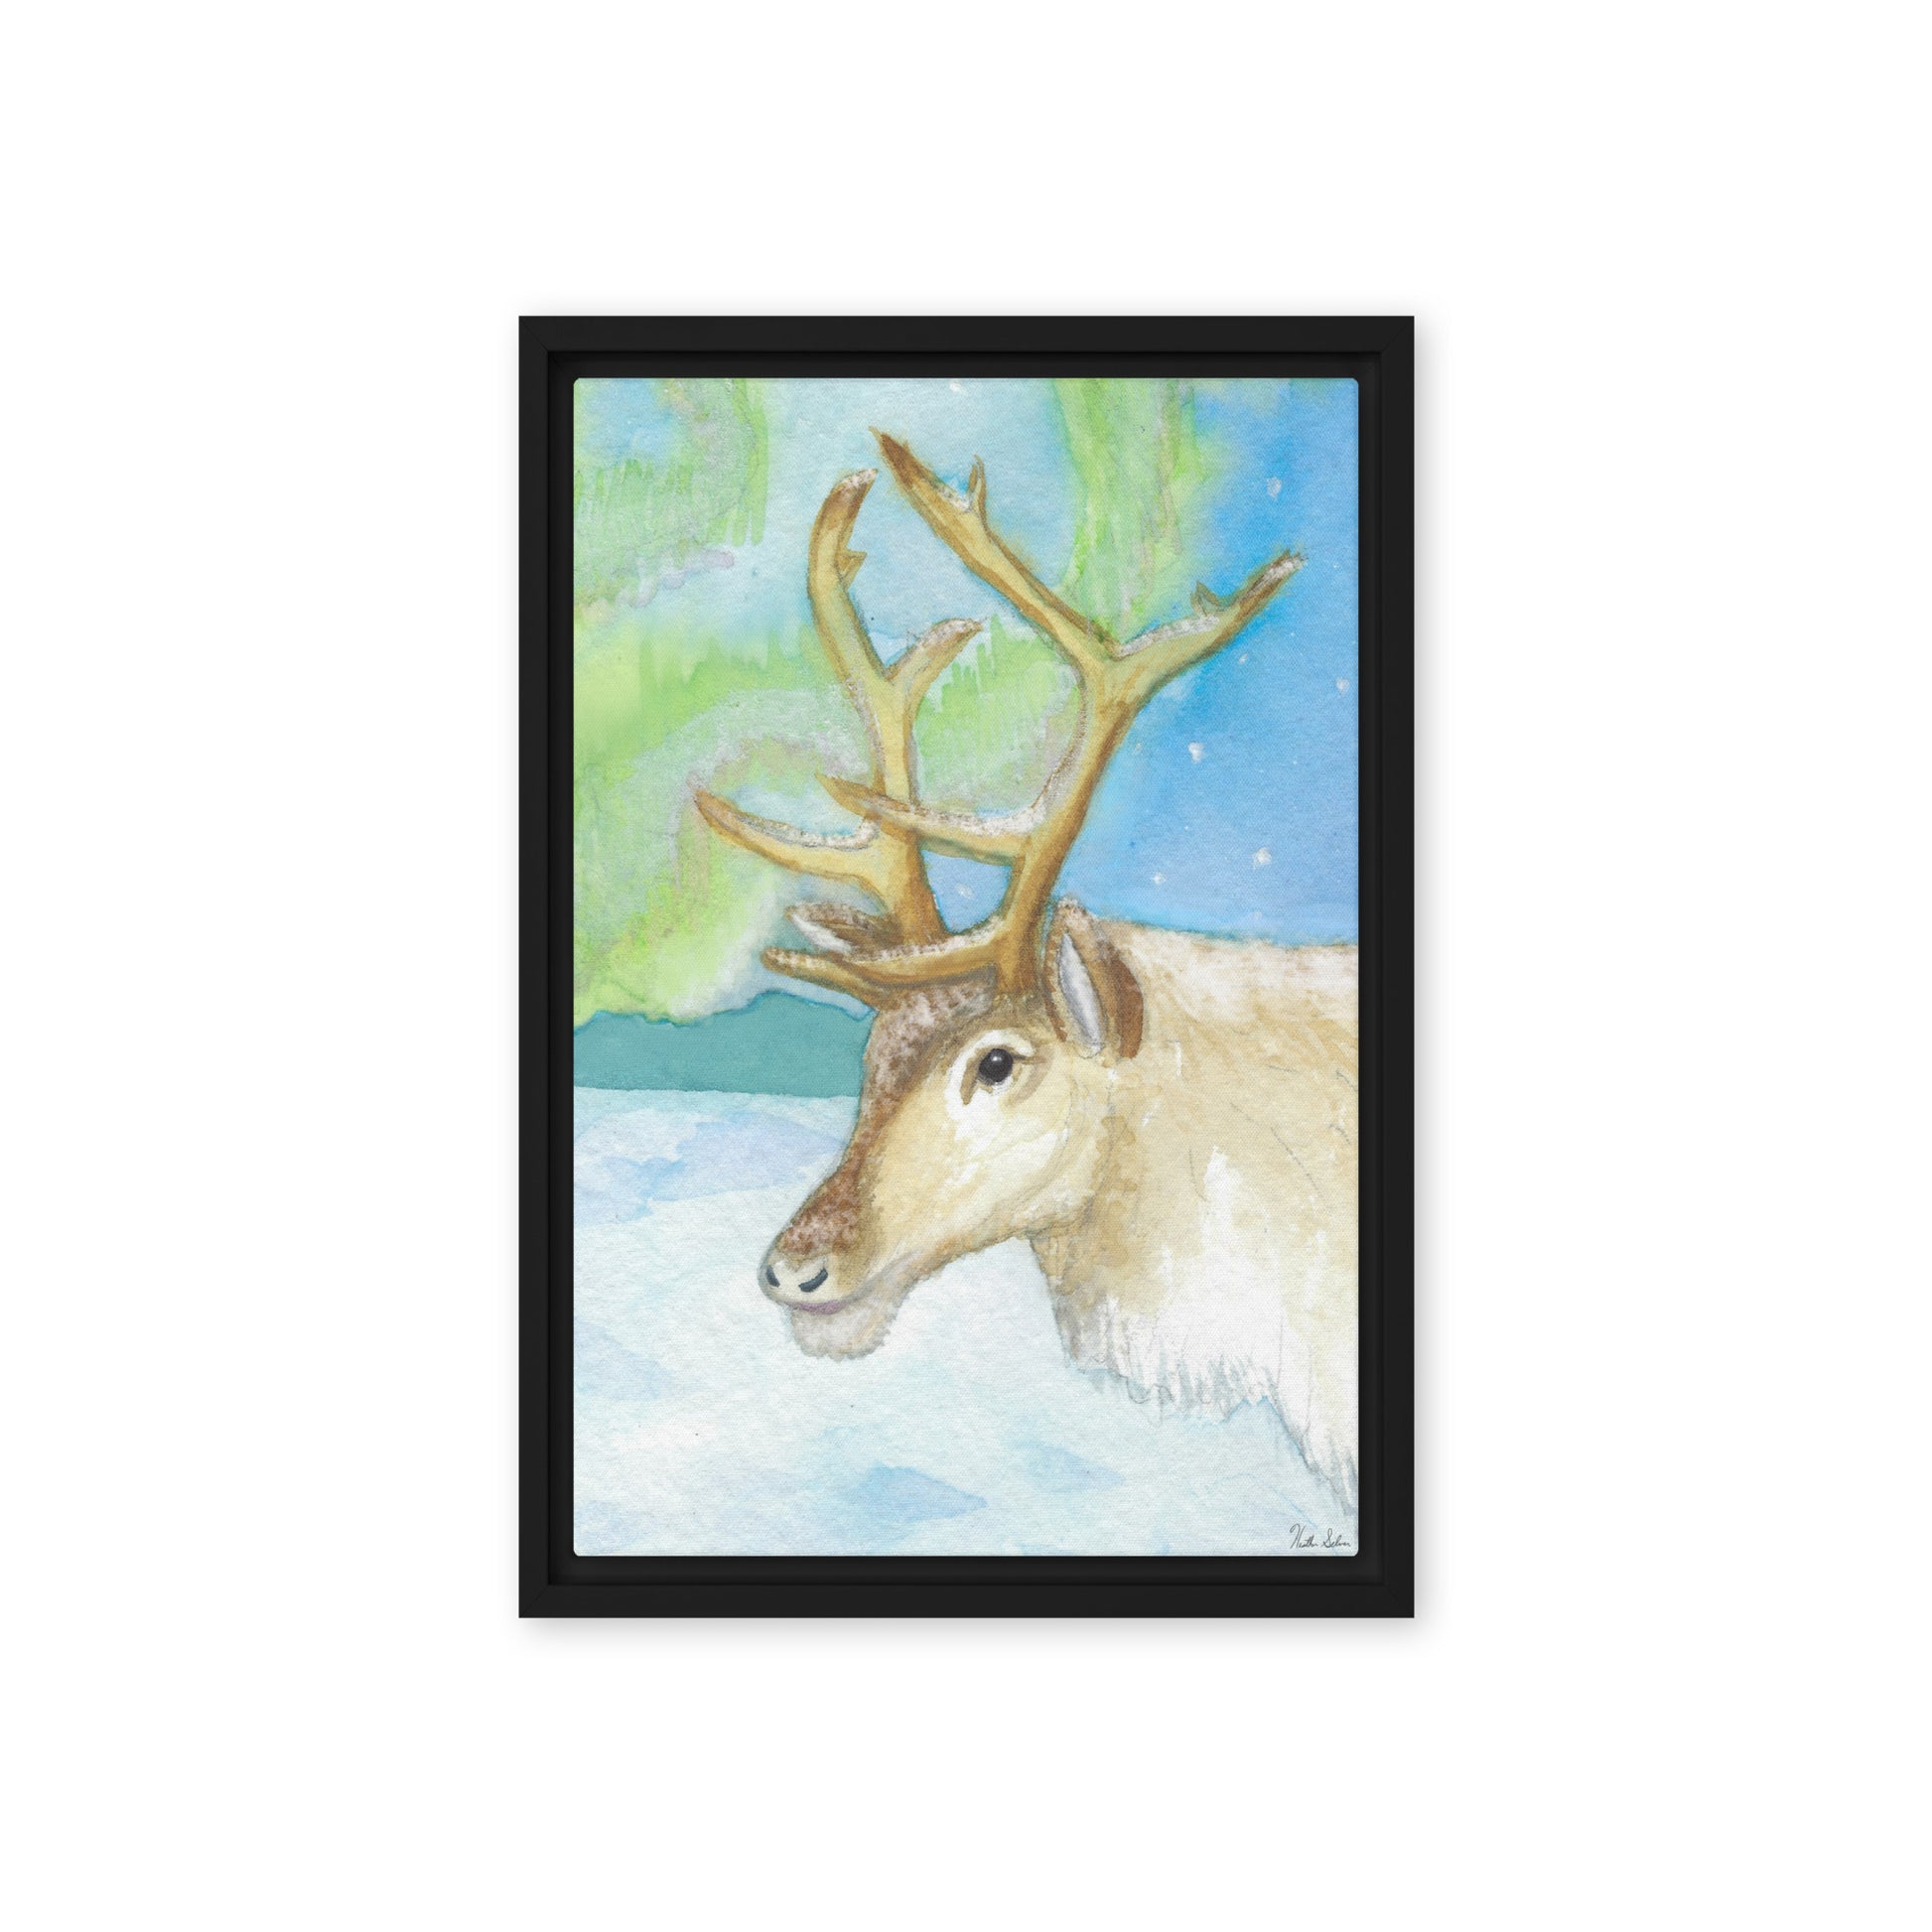 12 by 18 inch framed canvas art print of Heather Silver's Northern Lights Reindeer.  Canvas print mounted in a black pine frame. Hanging hardware included.